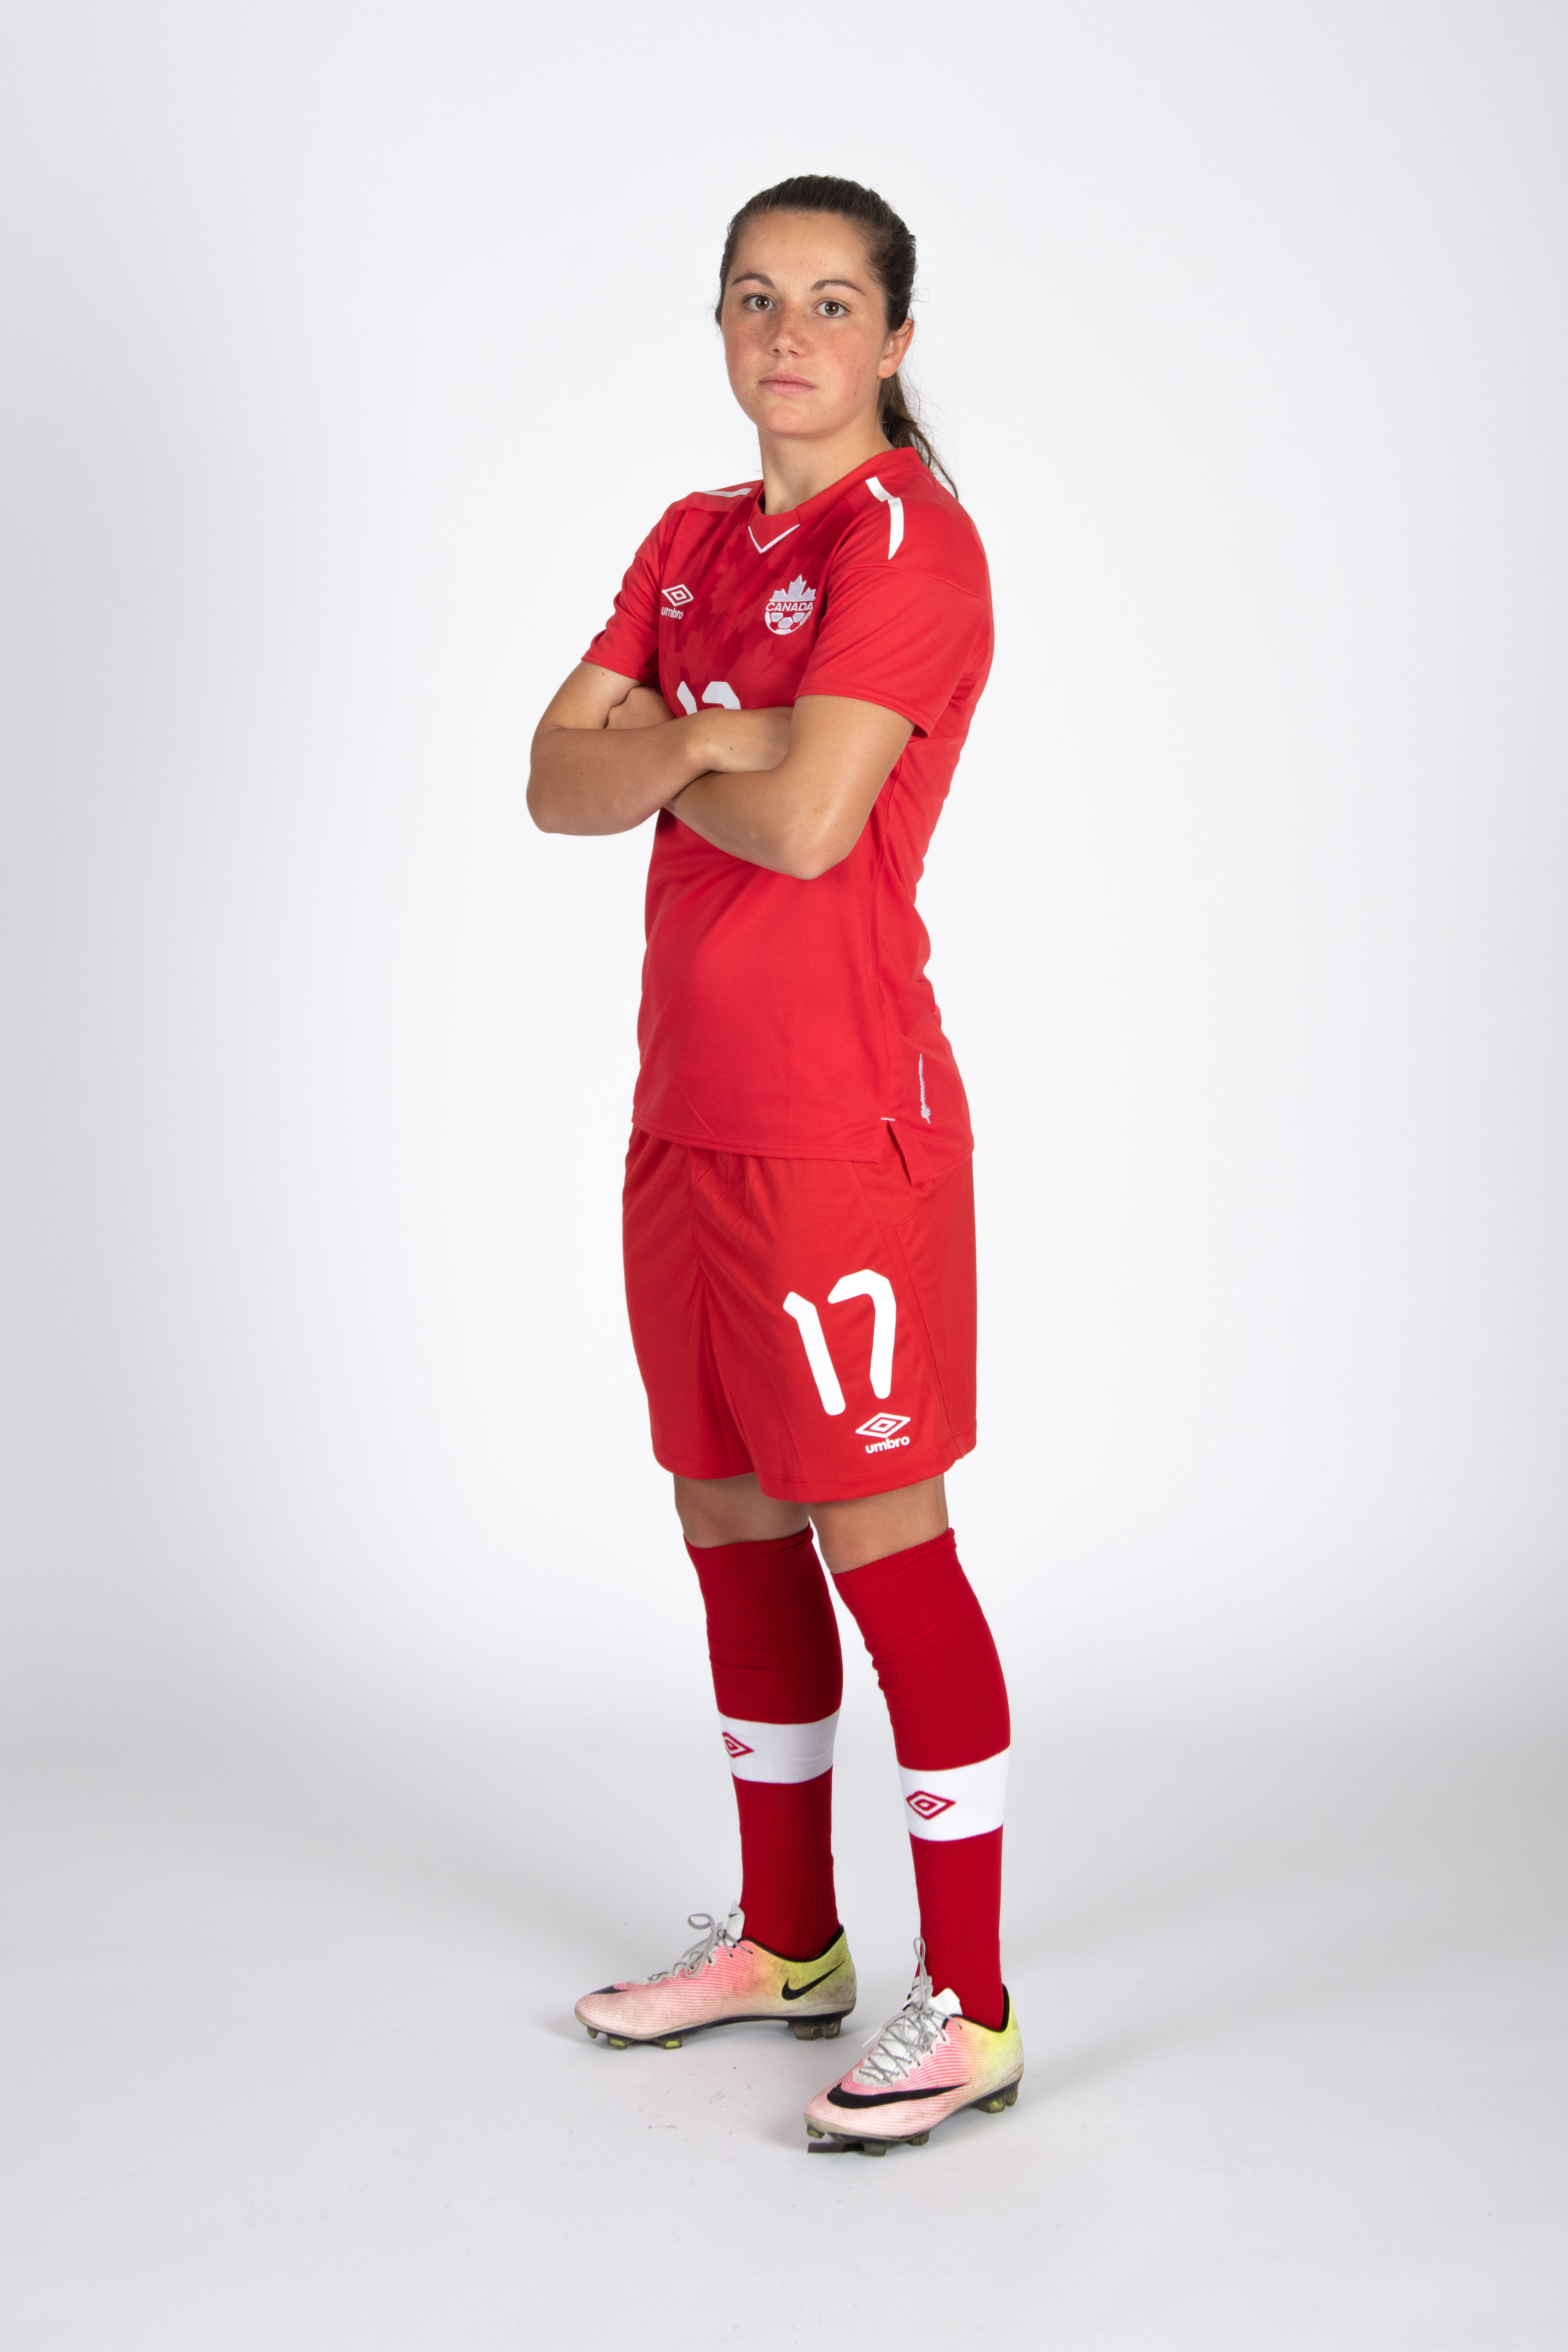 20180604_CANWNT_Fleming_byBazyl26